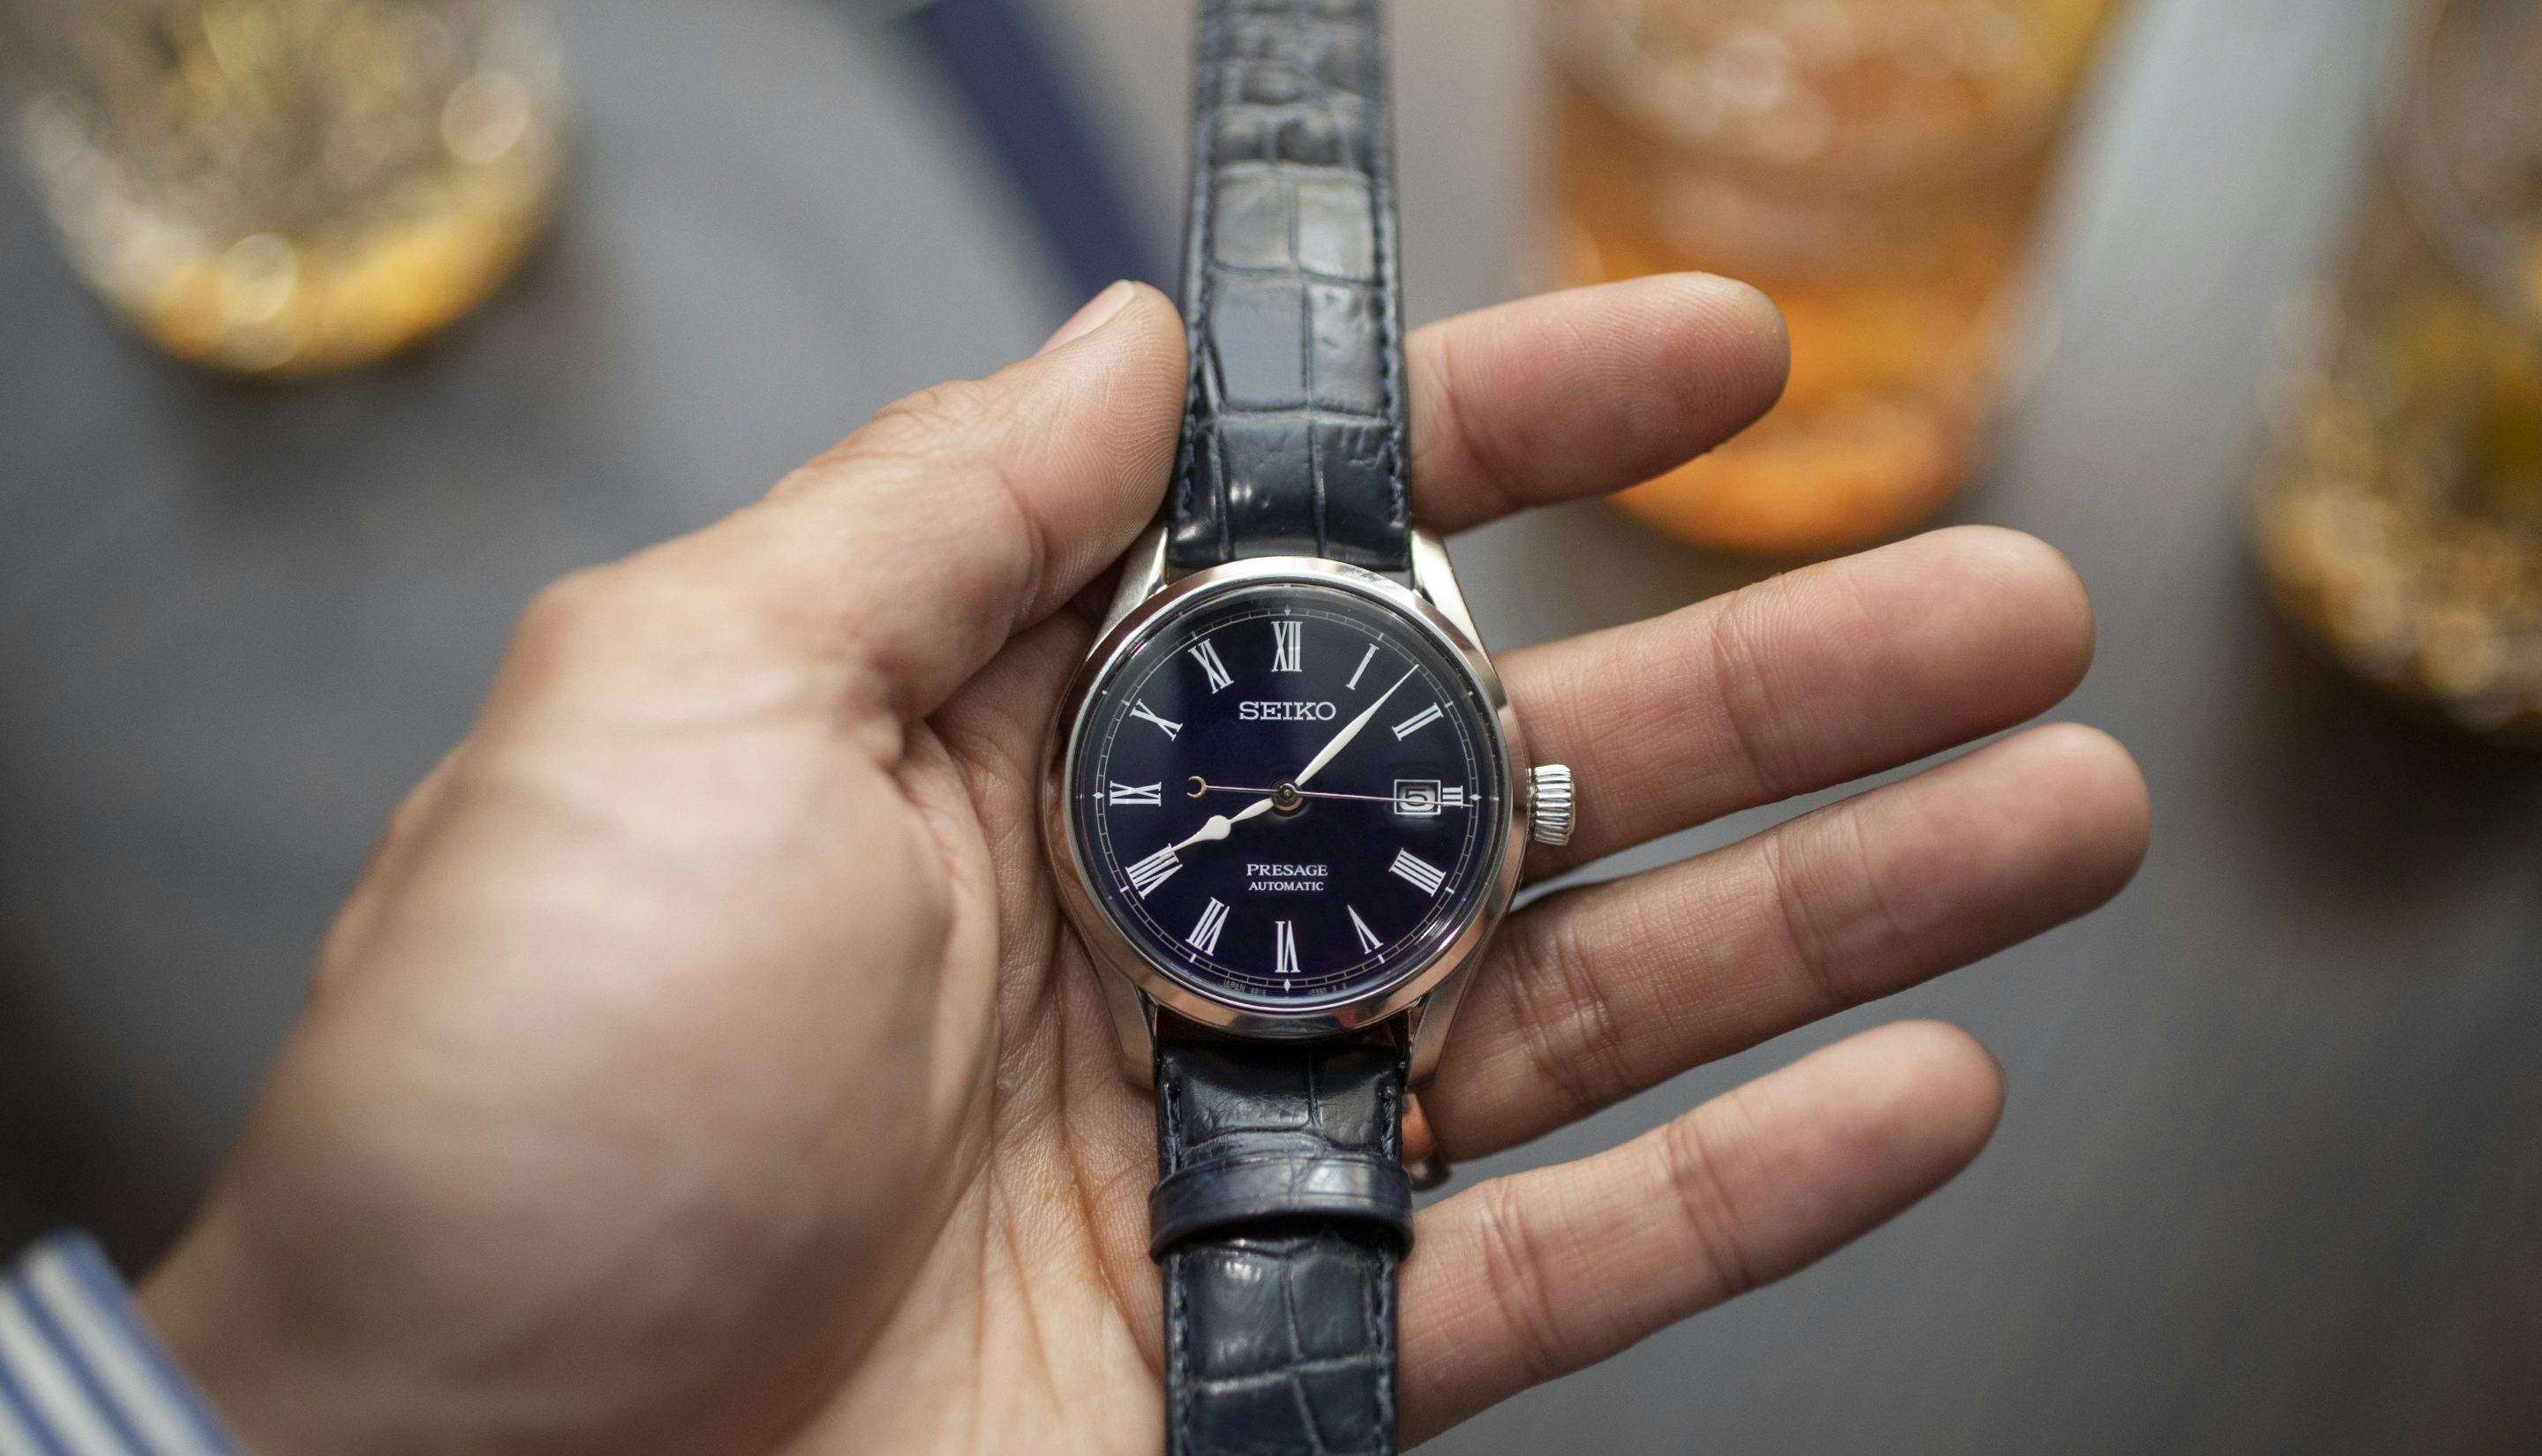 Photo Report: An Evening With Seiko In New York City - Hodinkee